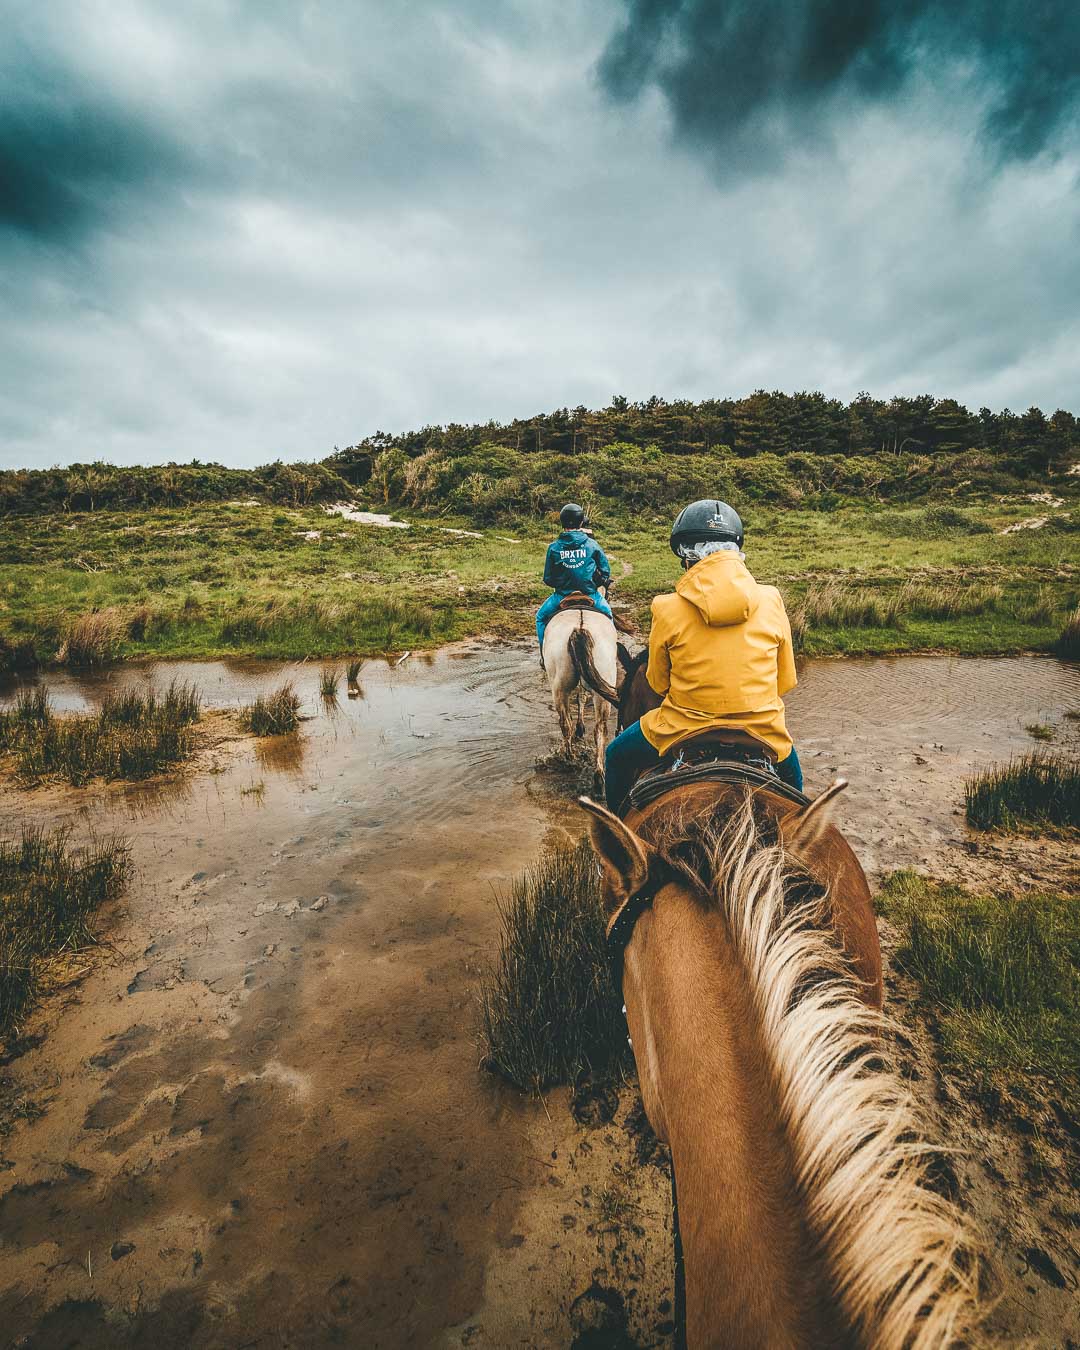 crossing a river with the horses